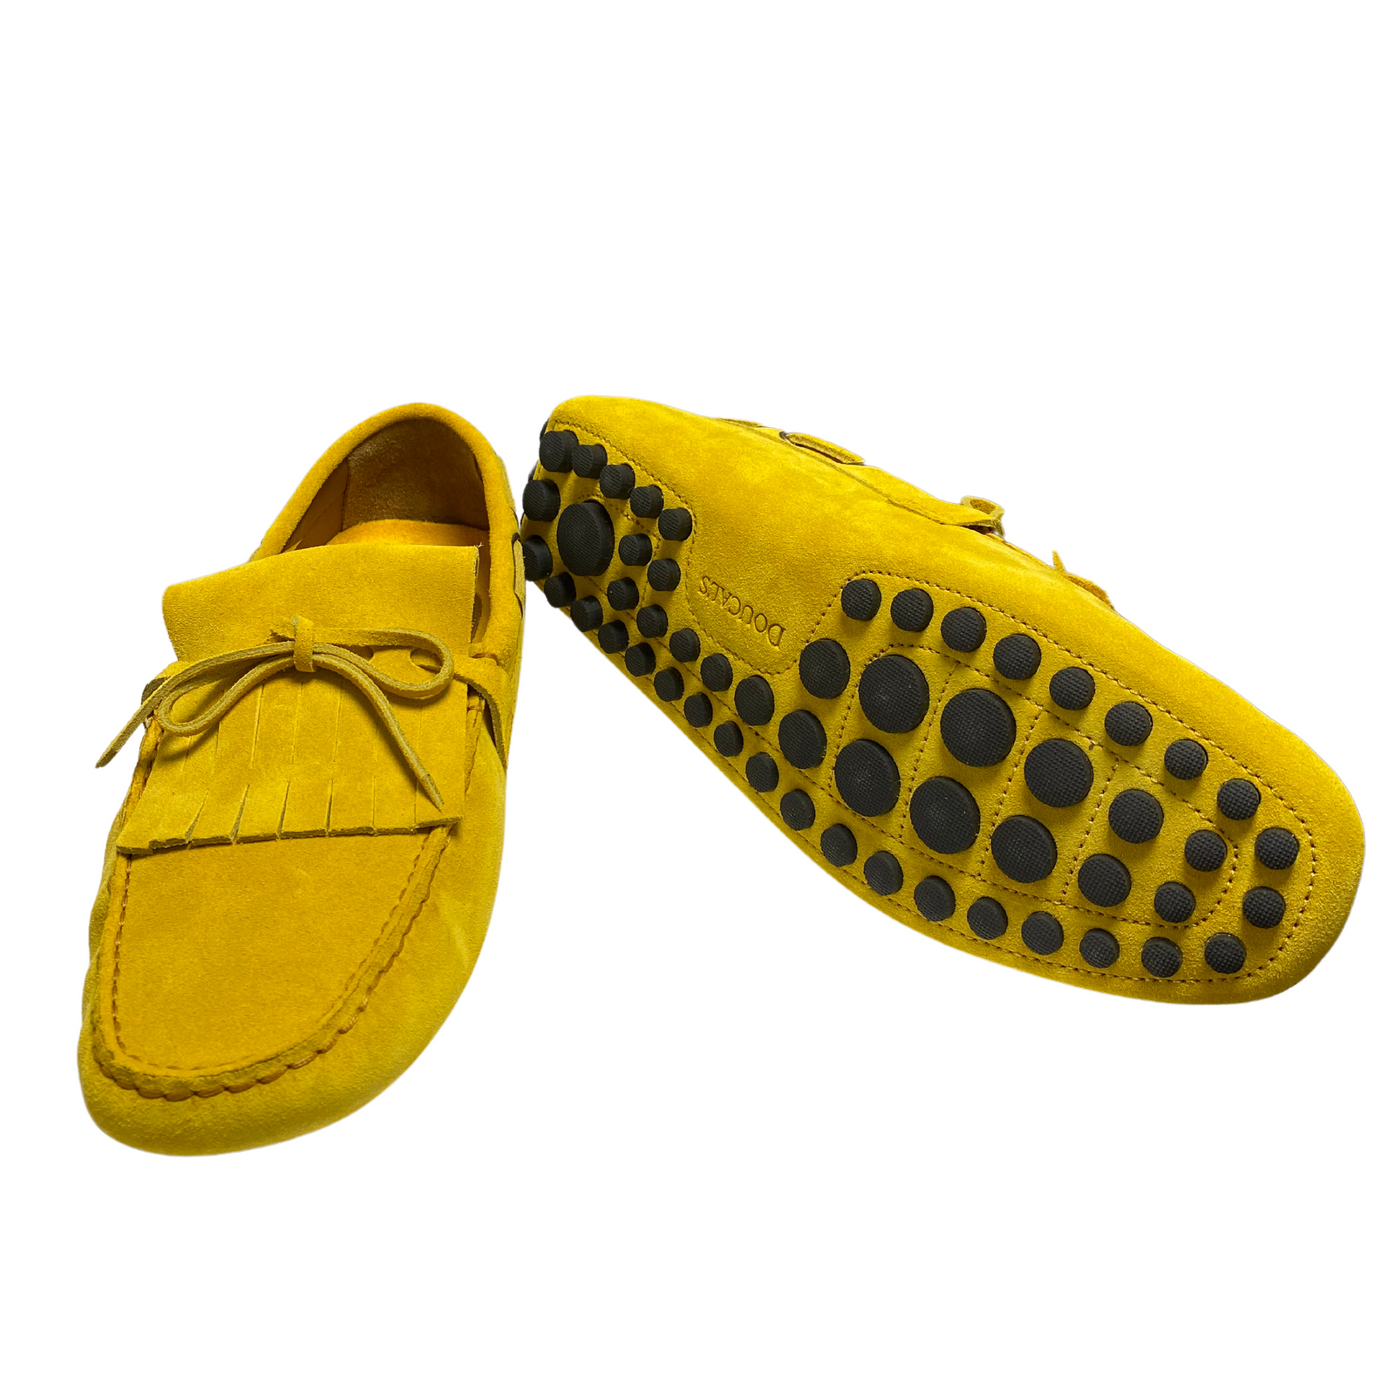 Doucal's Moccasin Loafers in Yellow